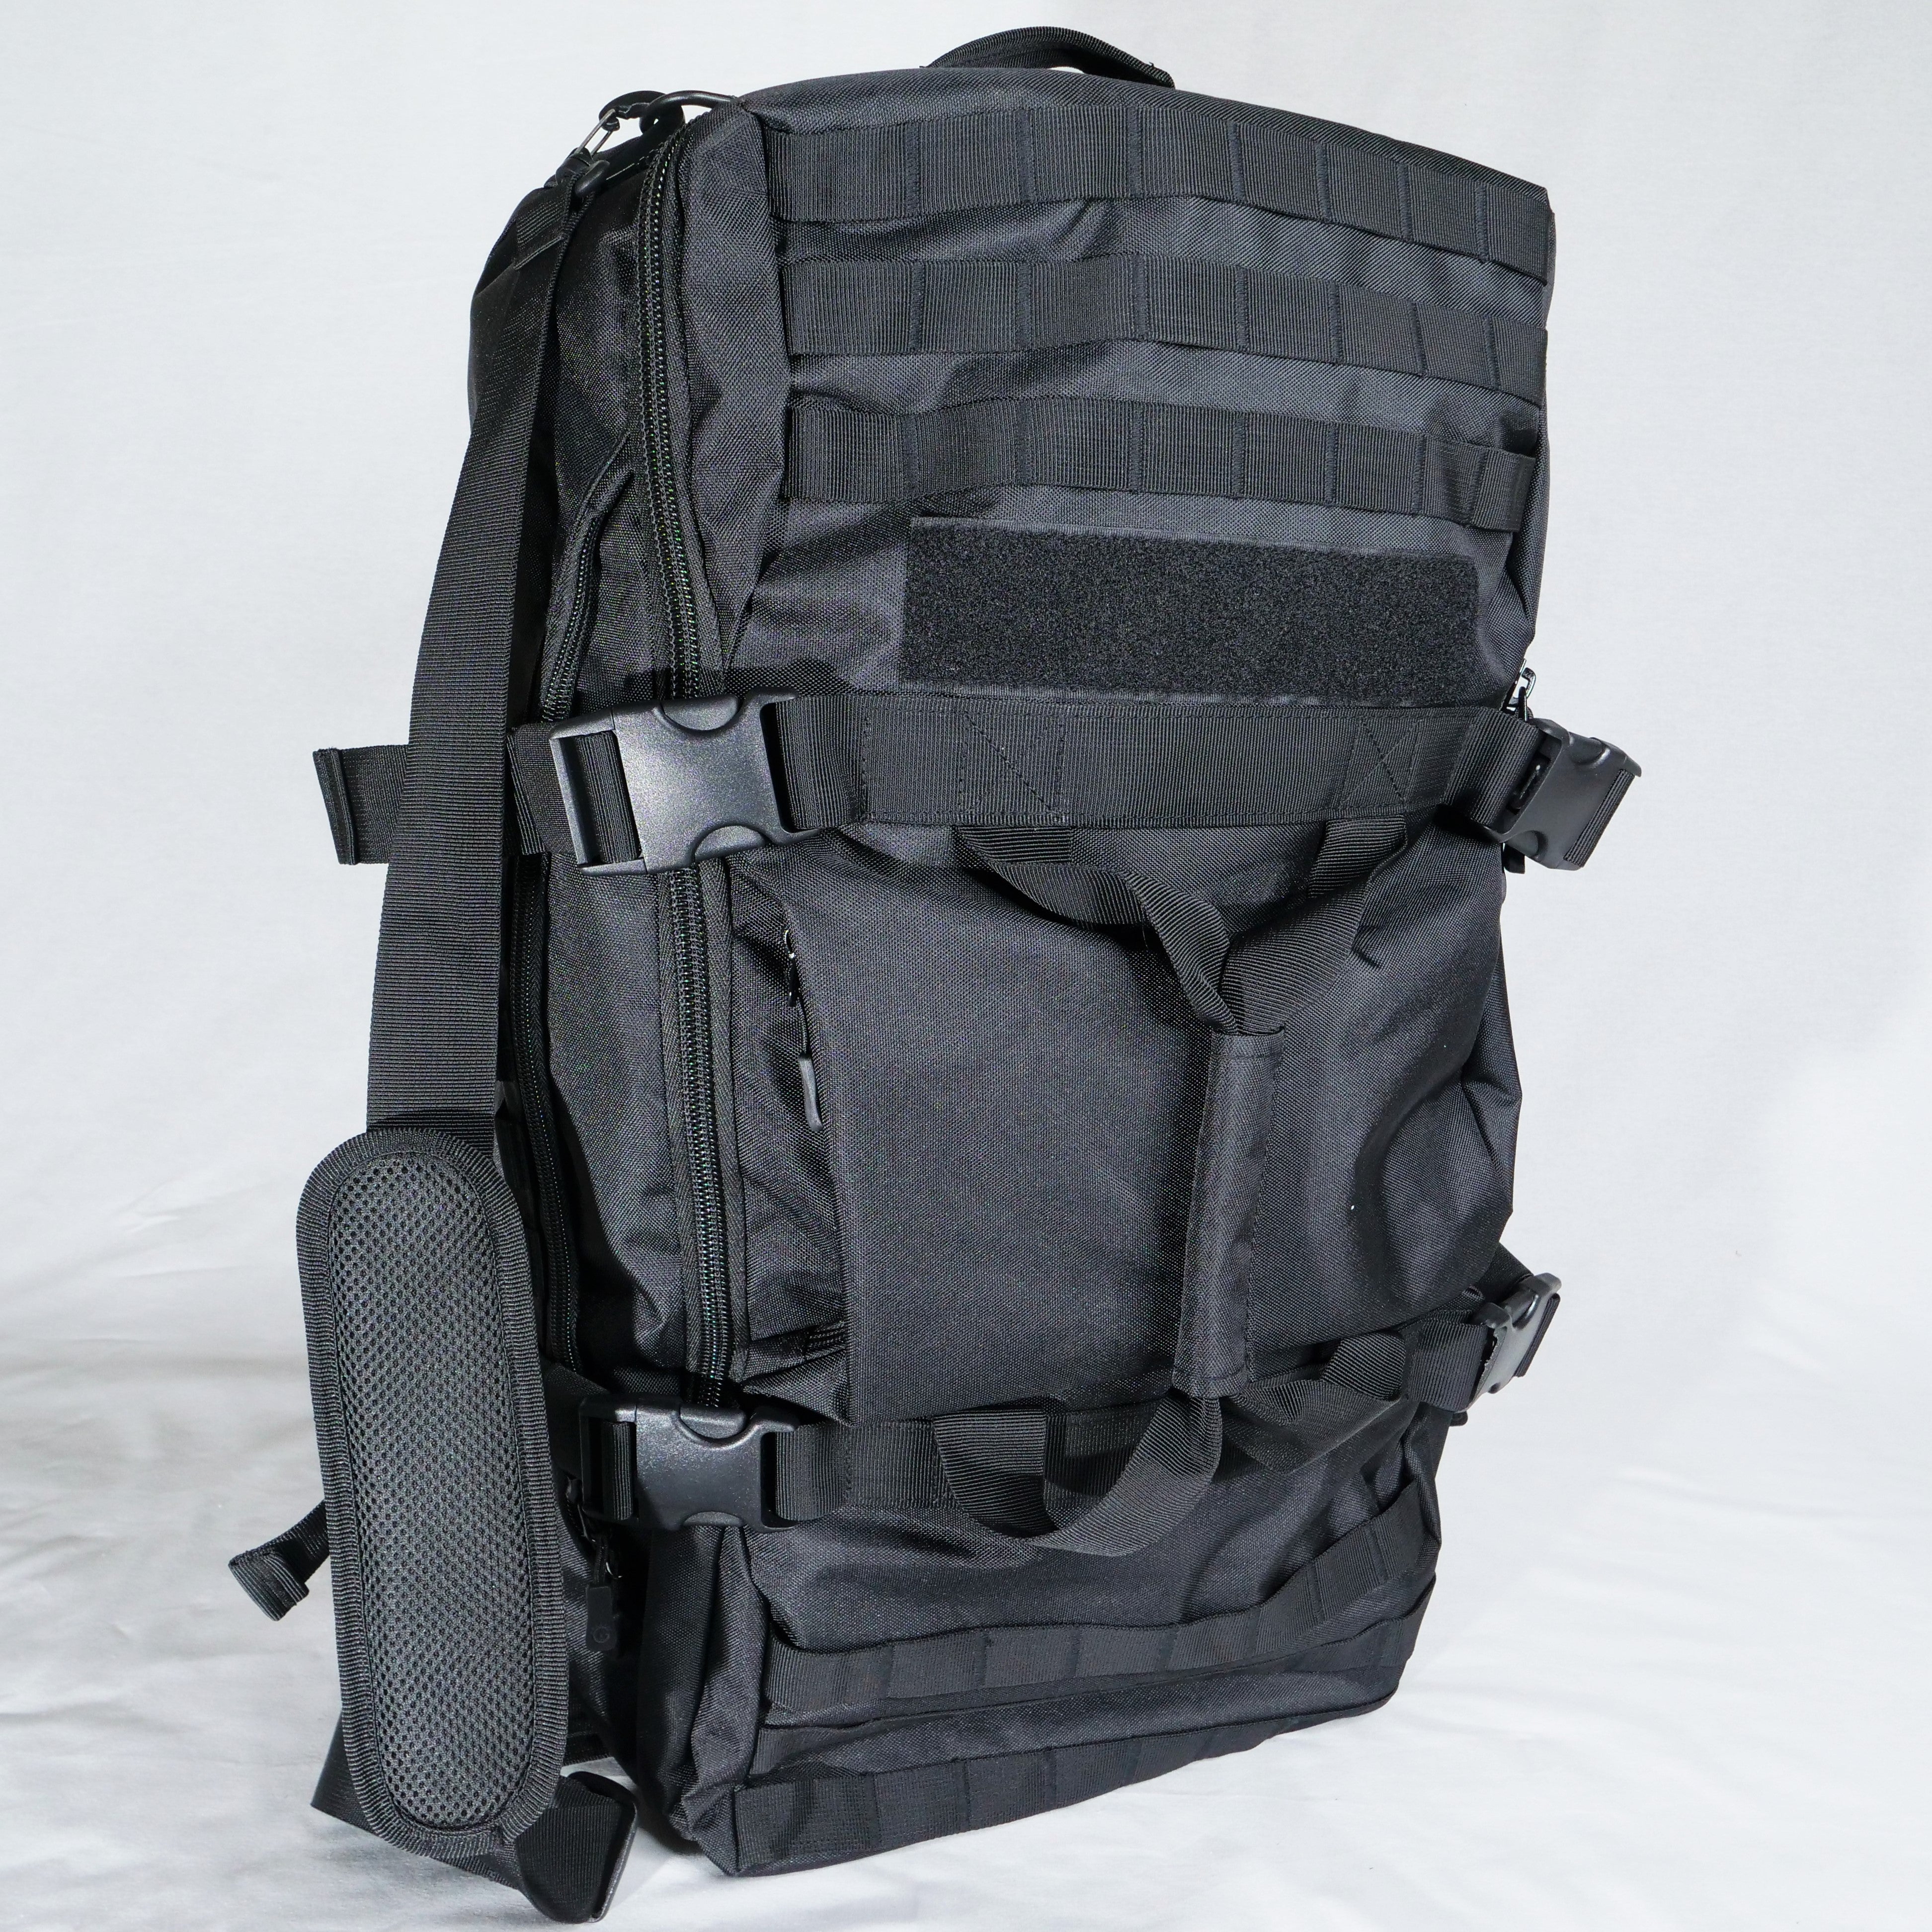 Fisherman's Life XL Backpack: Water-resistant, Carry-On Ready, Rod Holders, Molle Straps for Accessories